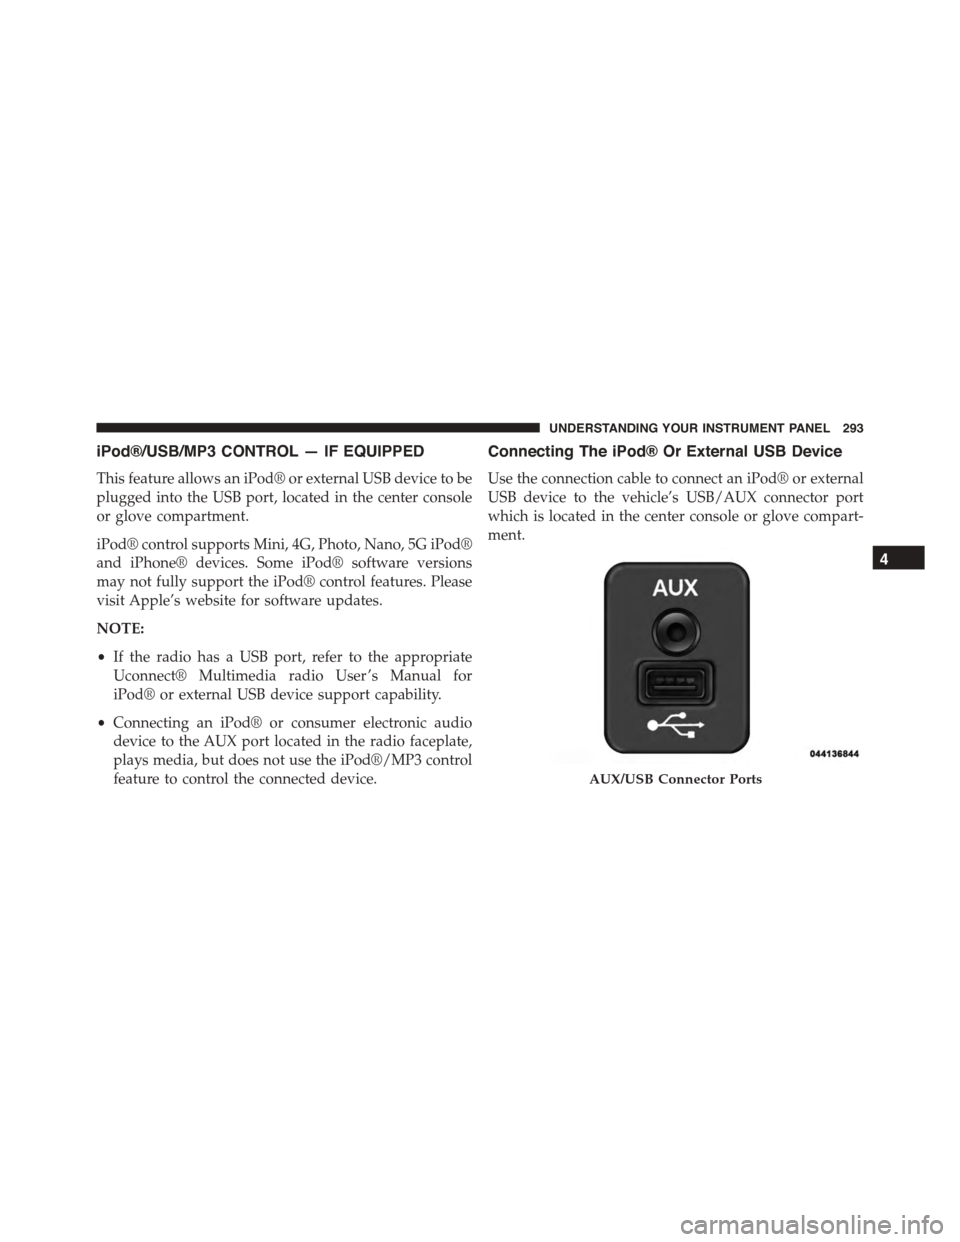 JEEP PATRIOT 2015 1.G Owners Manual iPod®/USB/MP3 CONTROL — IF EQUIPPED
This feature allows an iPod® or external USB device to be
plugged into the USB port, located in the center console
or glove compartment.
iPod® control supports